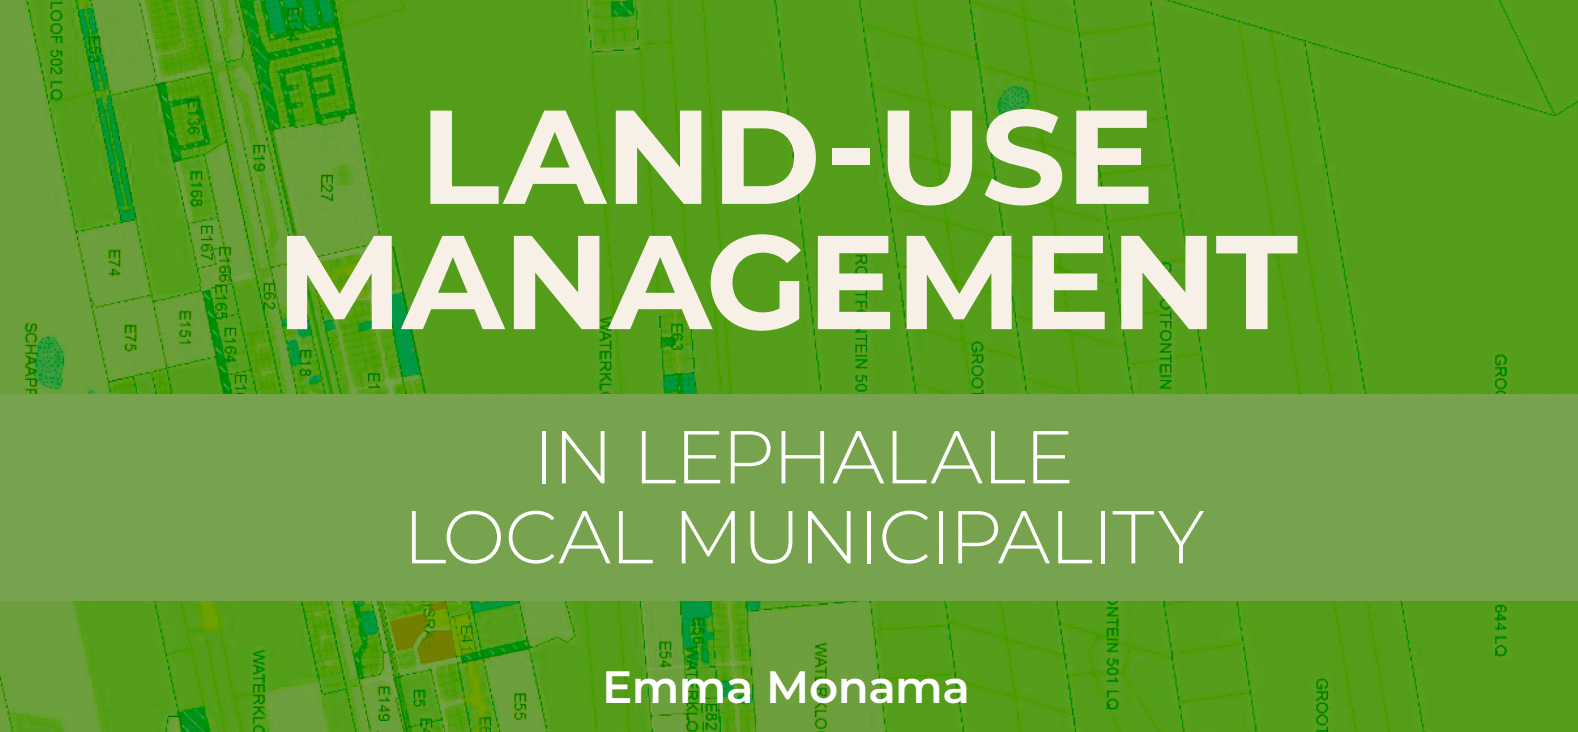 Report | Land Use and Management in Lephalale Local Municipality